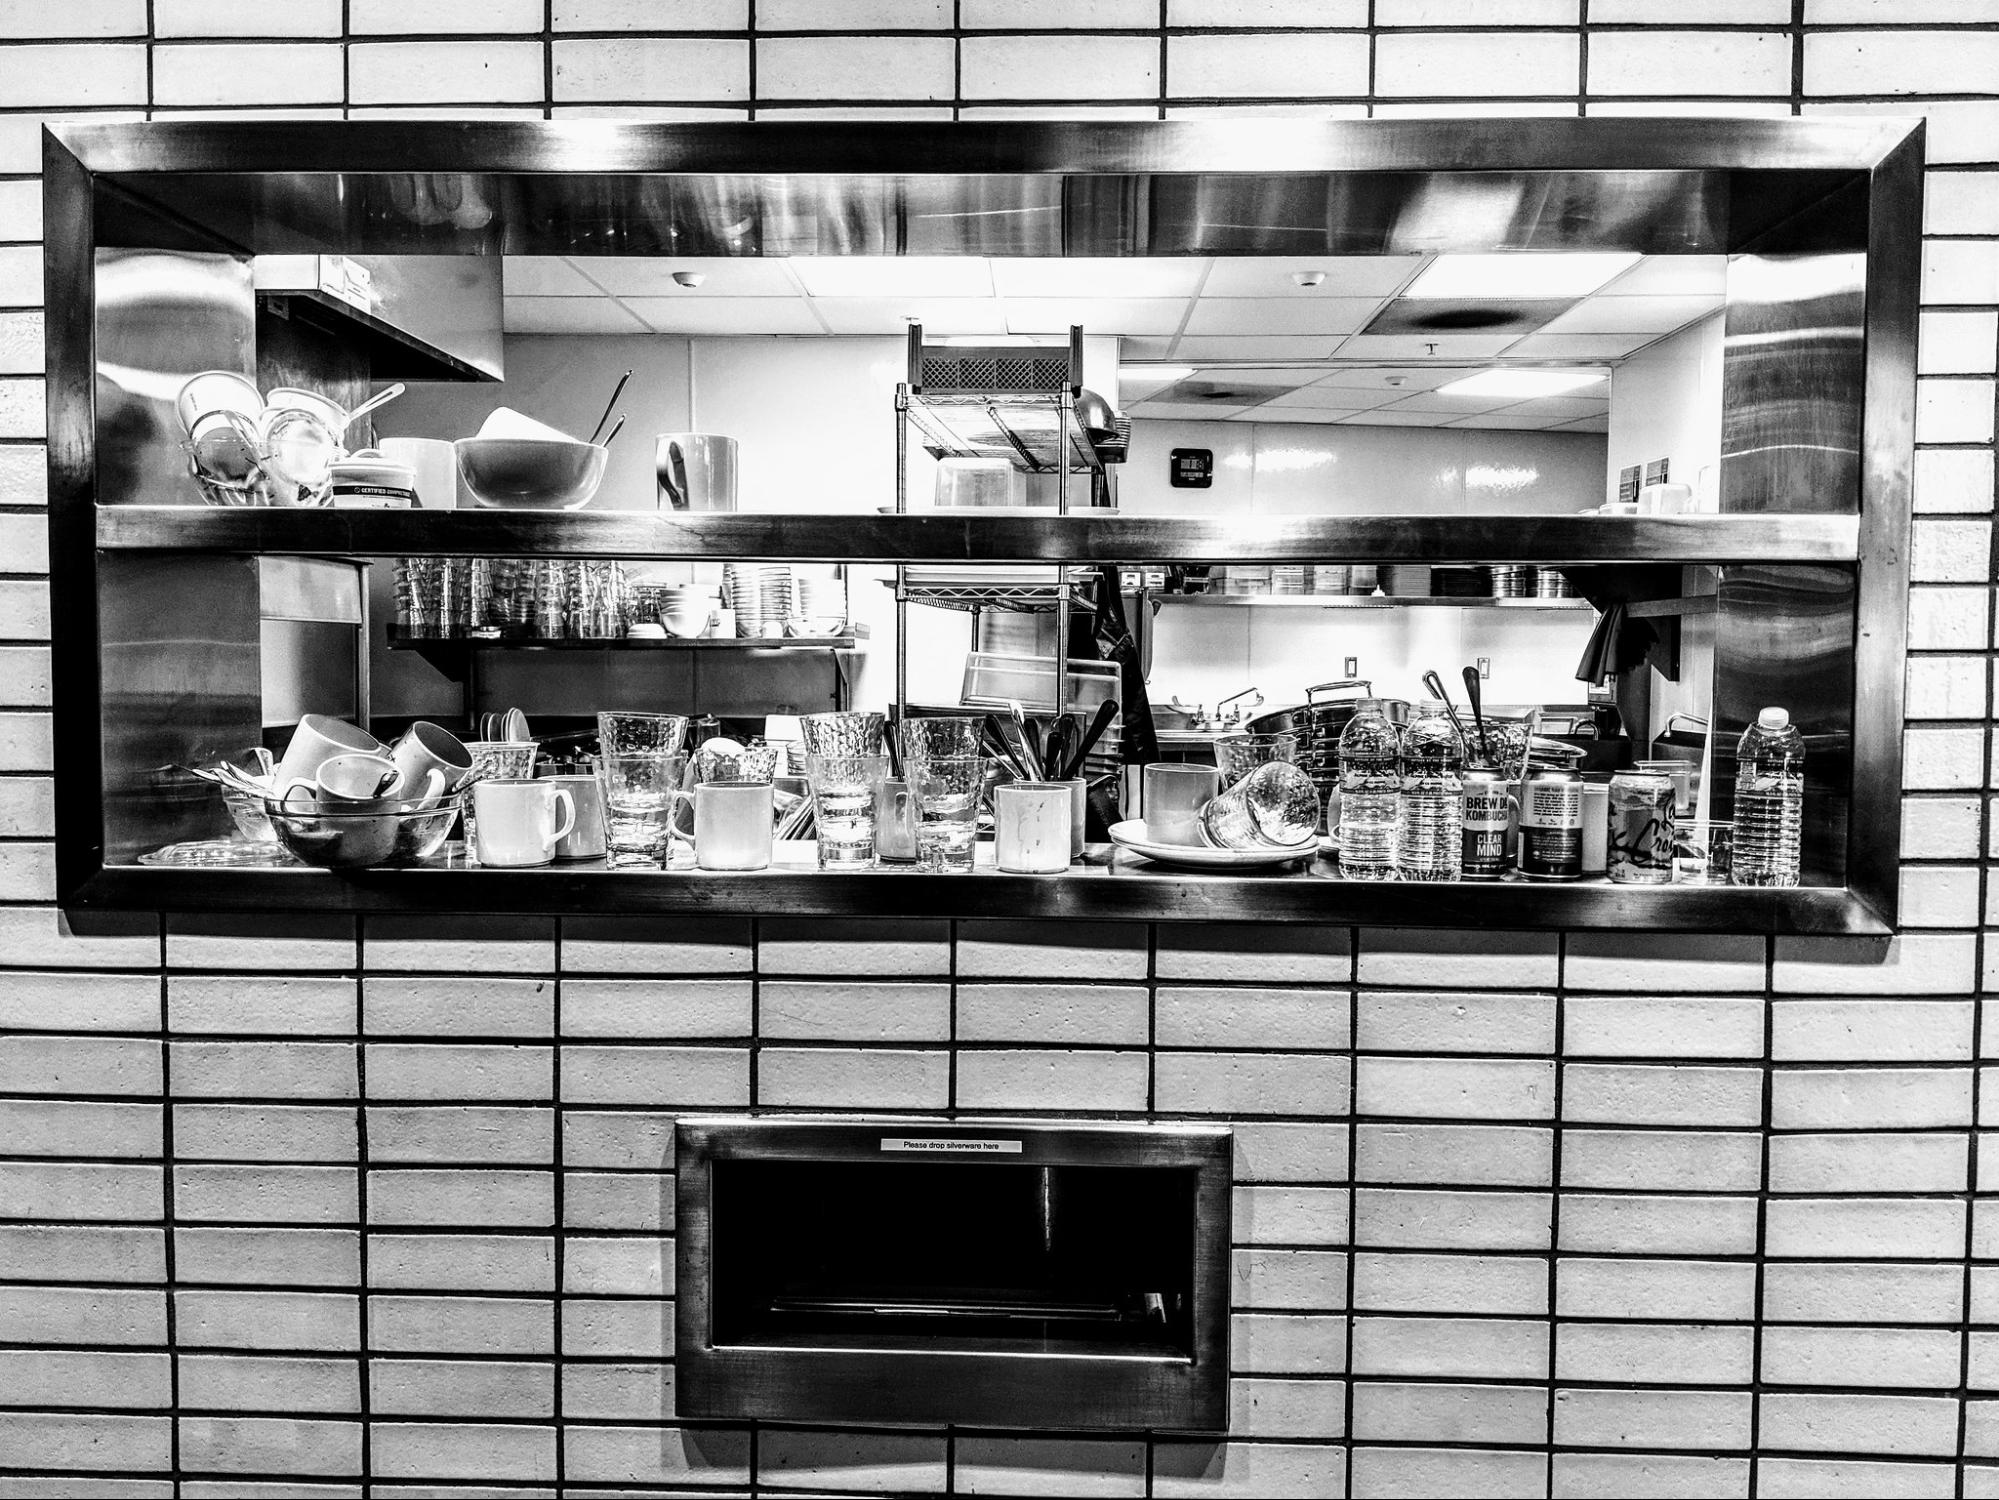 looking through window and counter of a cafeteria kitchen with bussed plates, cups and items in view; modern, sterile kitchen design